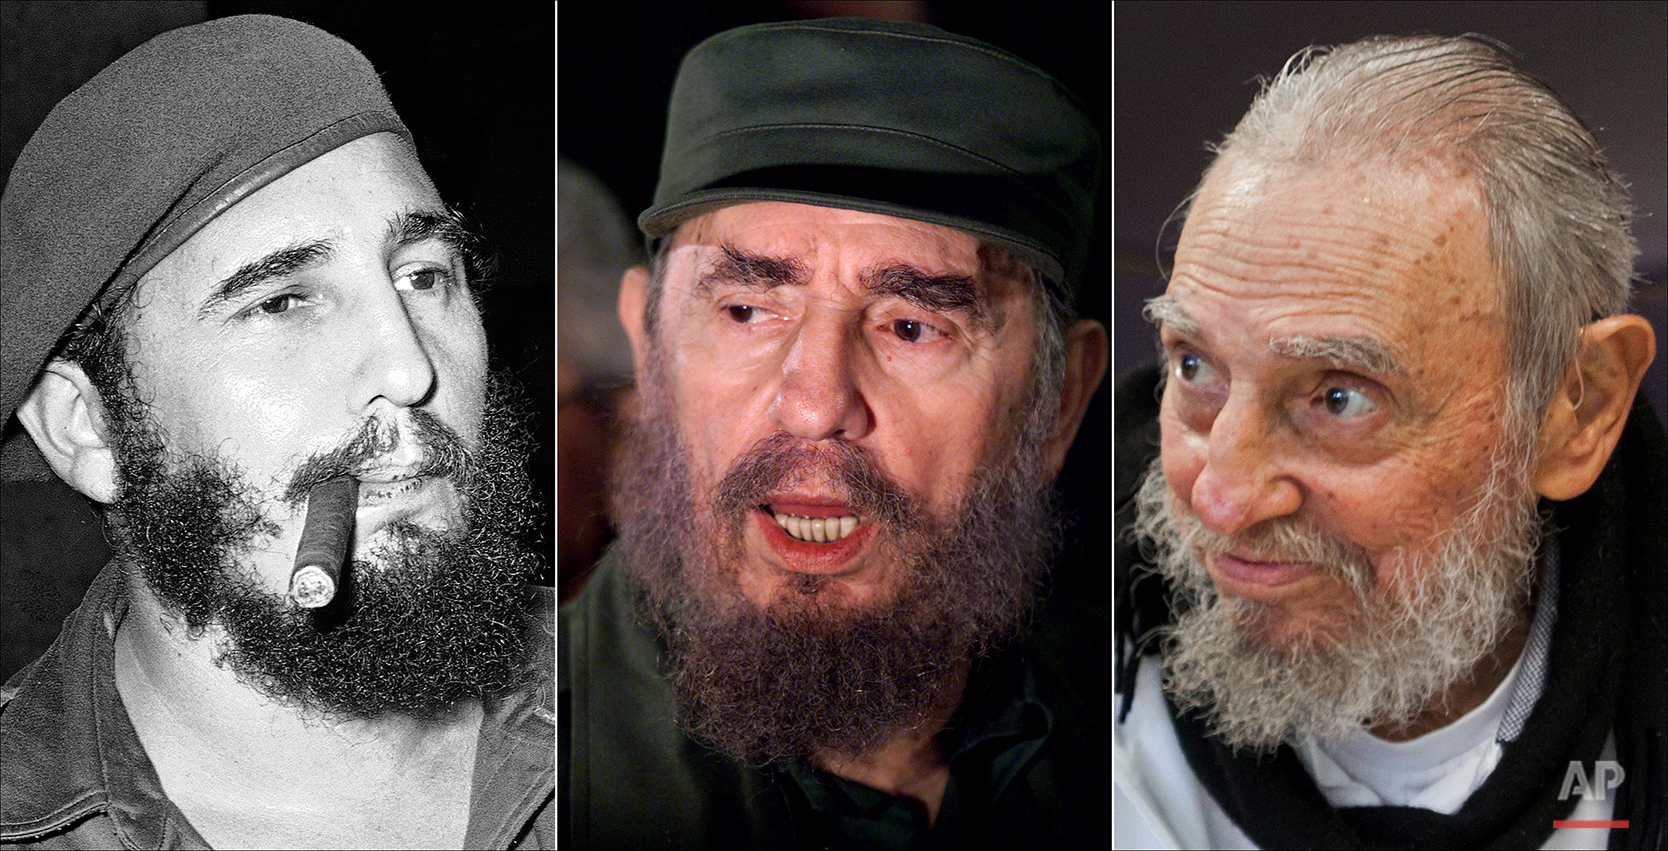  This combo of three file photos shows Fidel Castro, from left; smoking a cigar in Havana, Cuba, April 29, 1961; speaking to the media while on a mission to collect Elian Gonzales in Washington, D.C., April 6, 2000; and at his Havana home on Feb. 13,